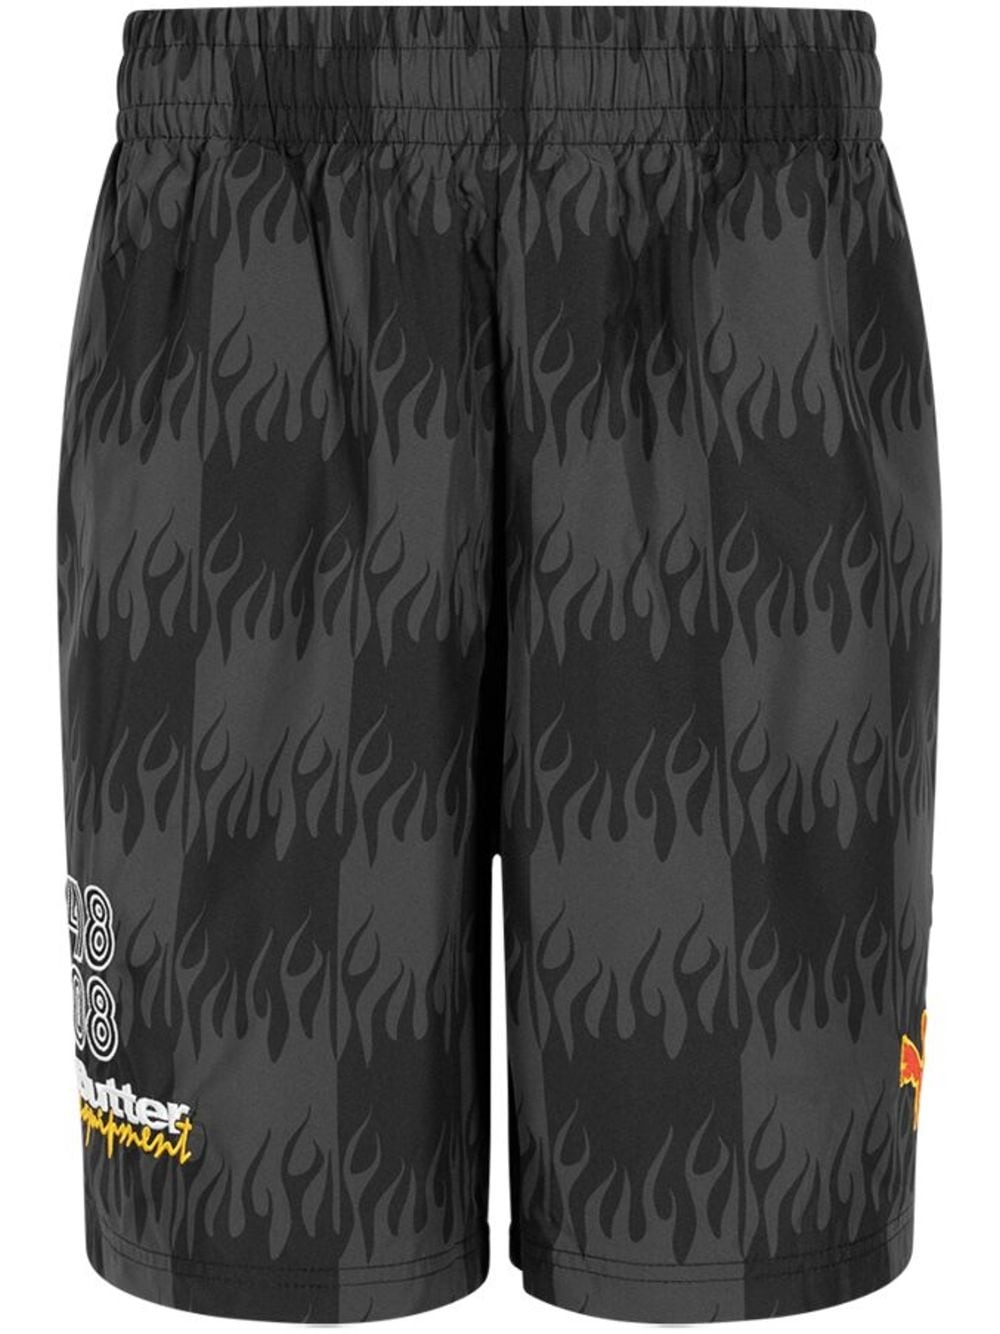 x Butter Goods 15 Year track shorts - 1